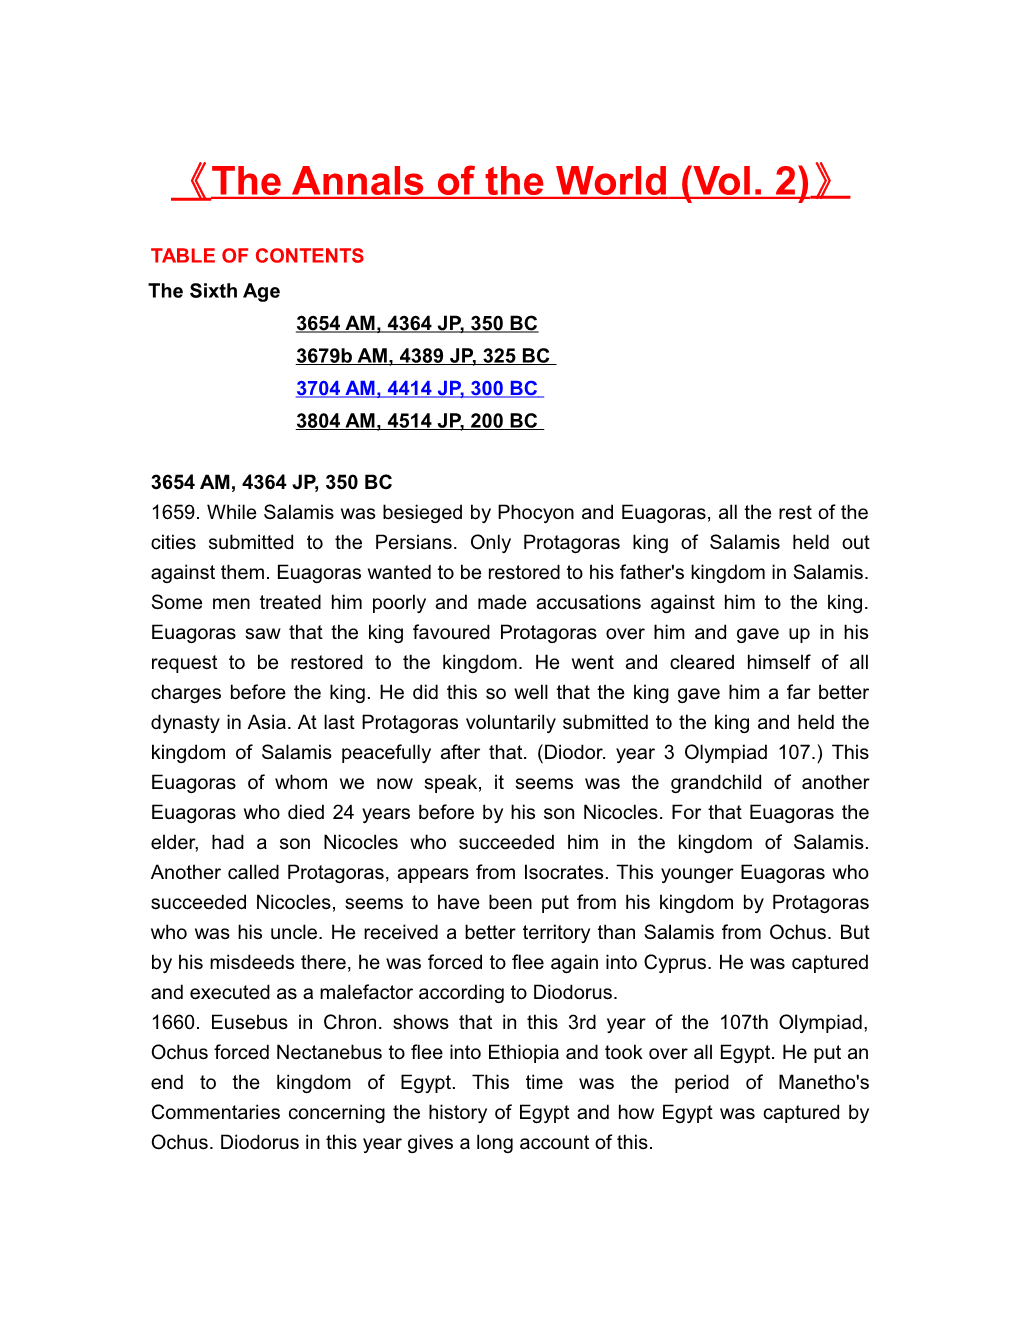 The Annals of the World (Vol. 2)